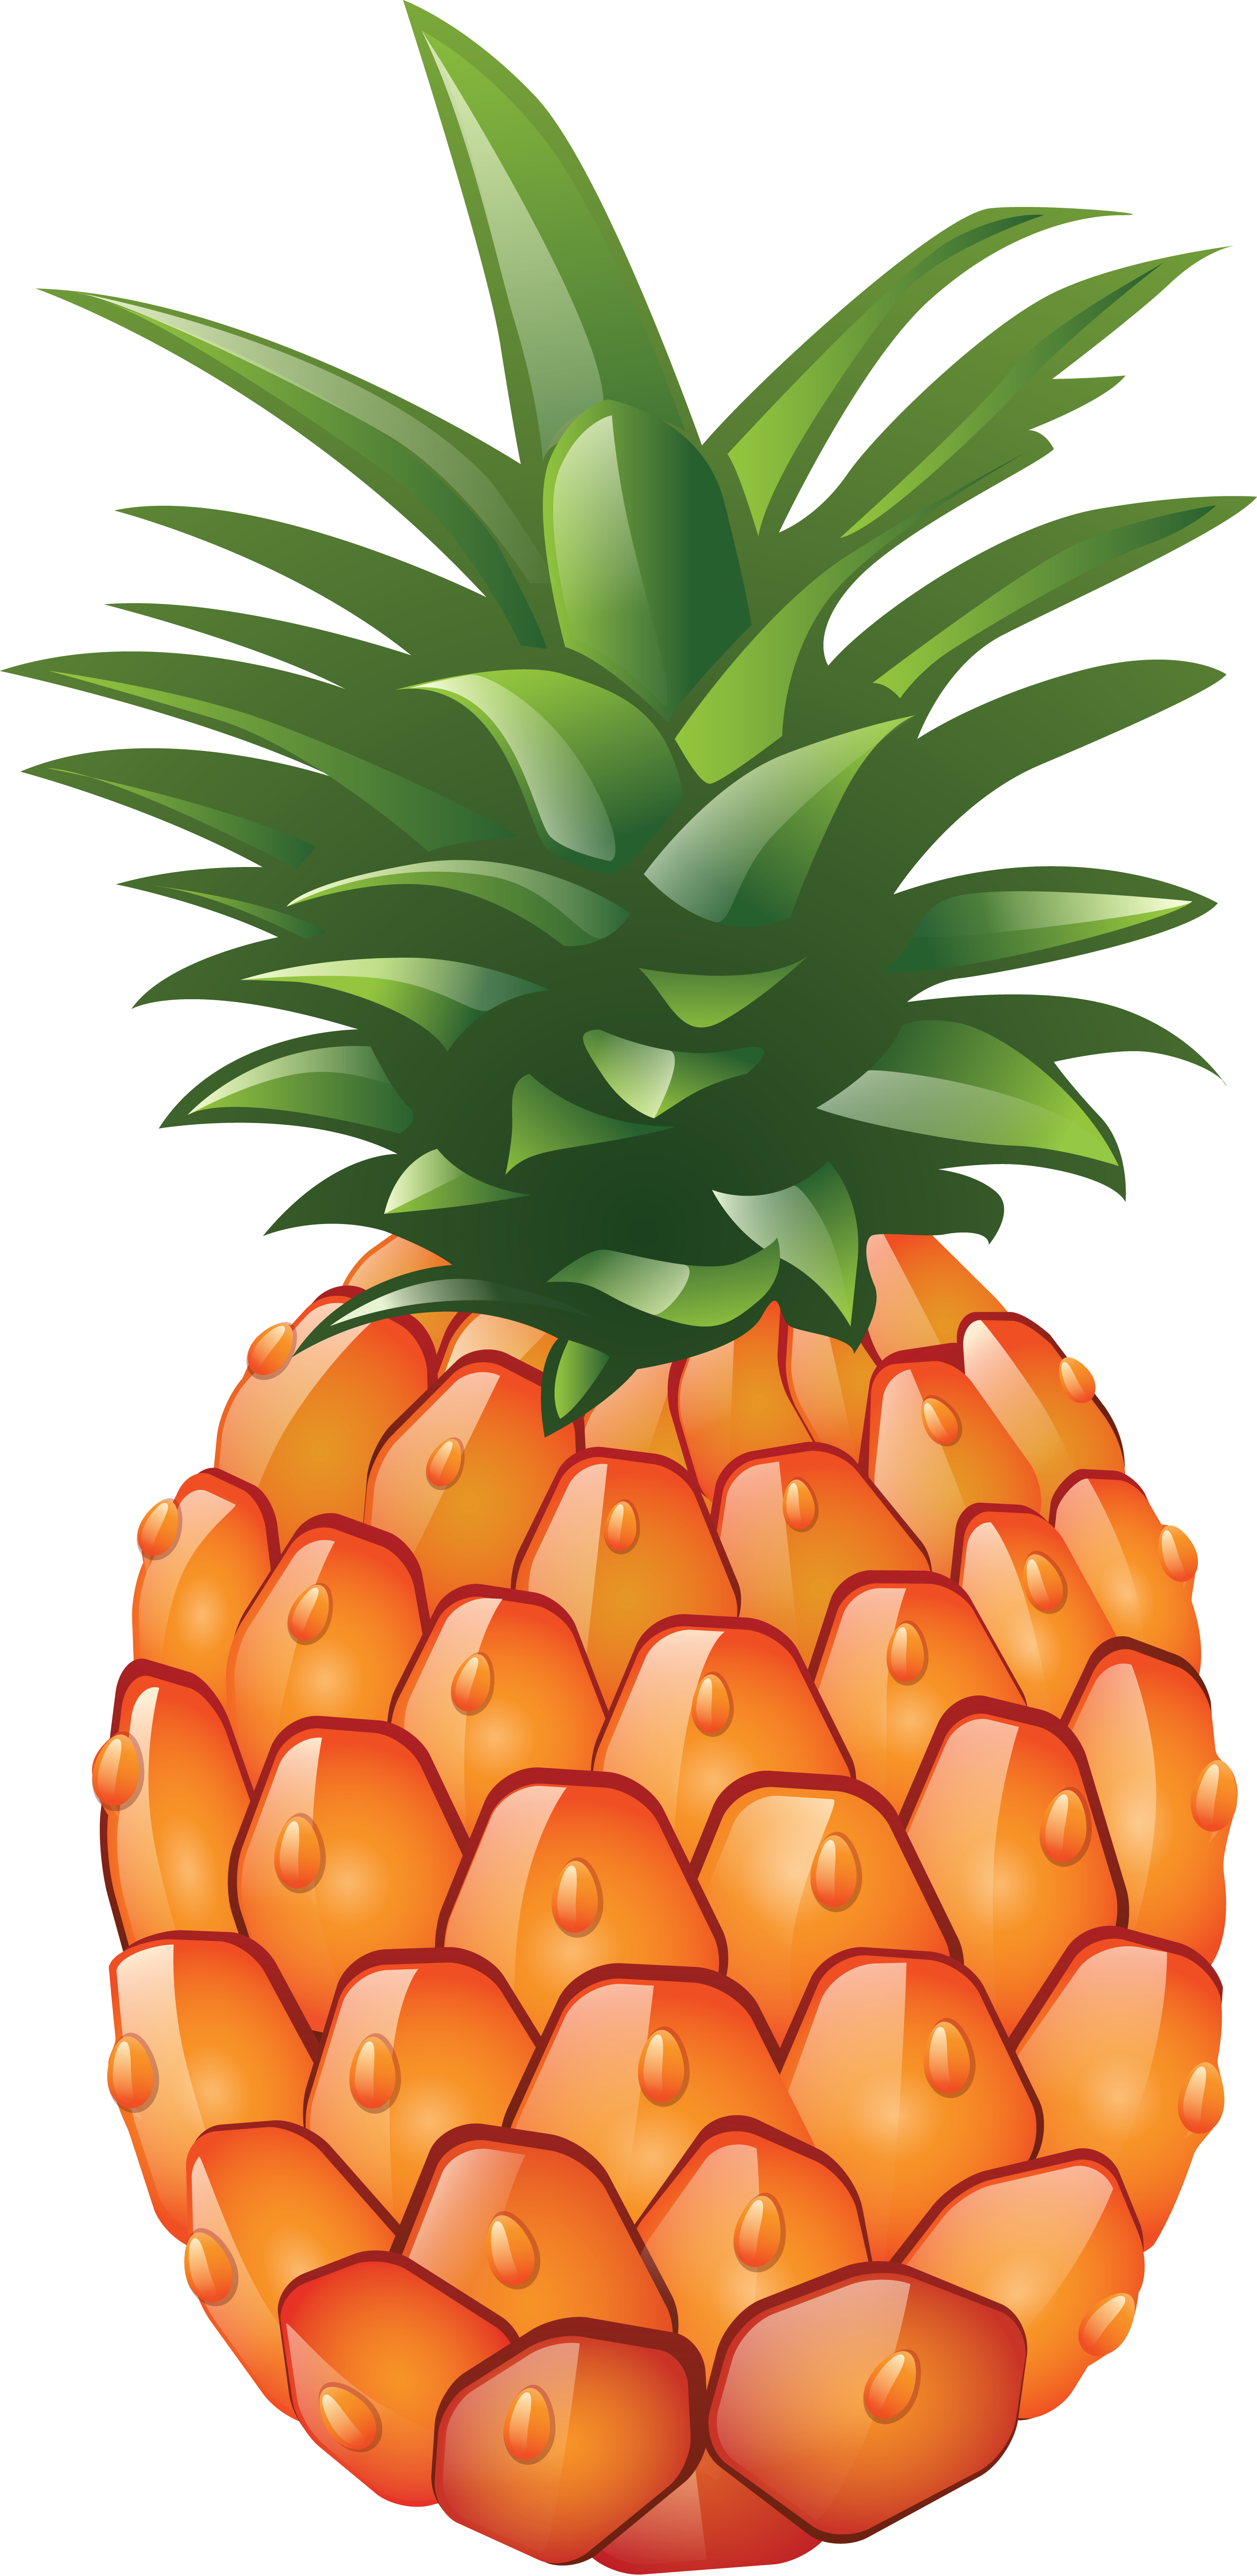 Flowers clipart pineapple. Png image free download